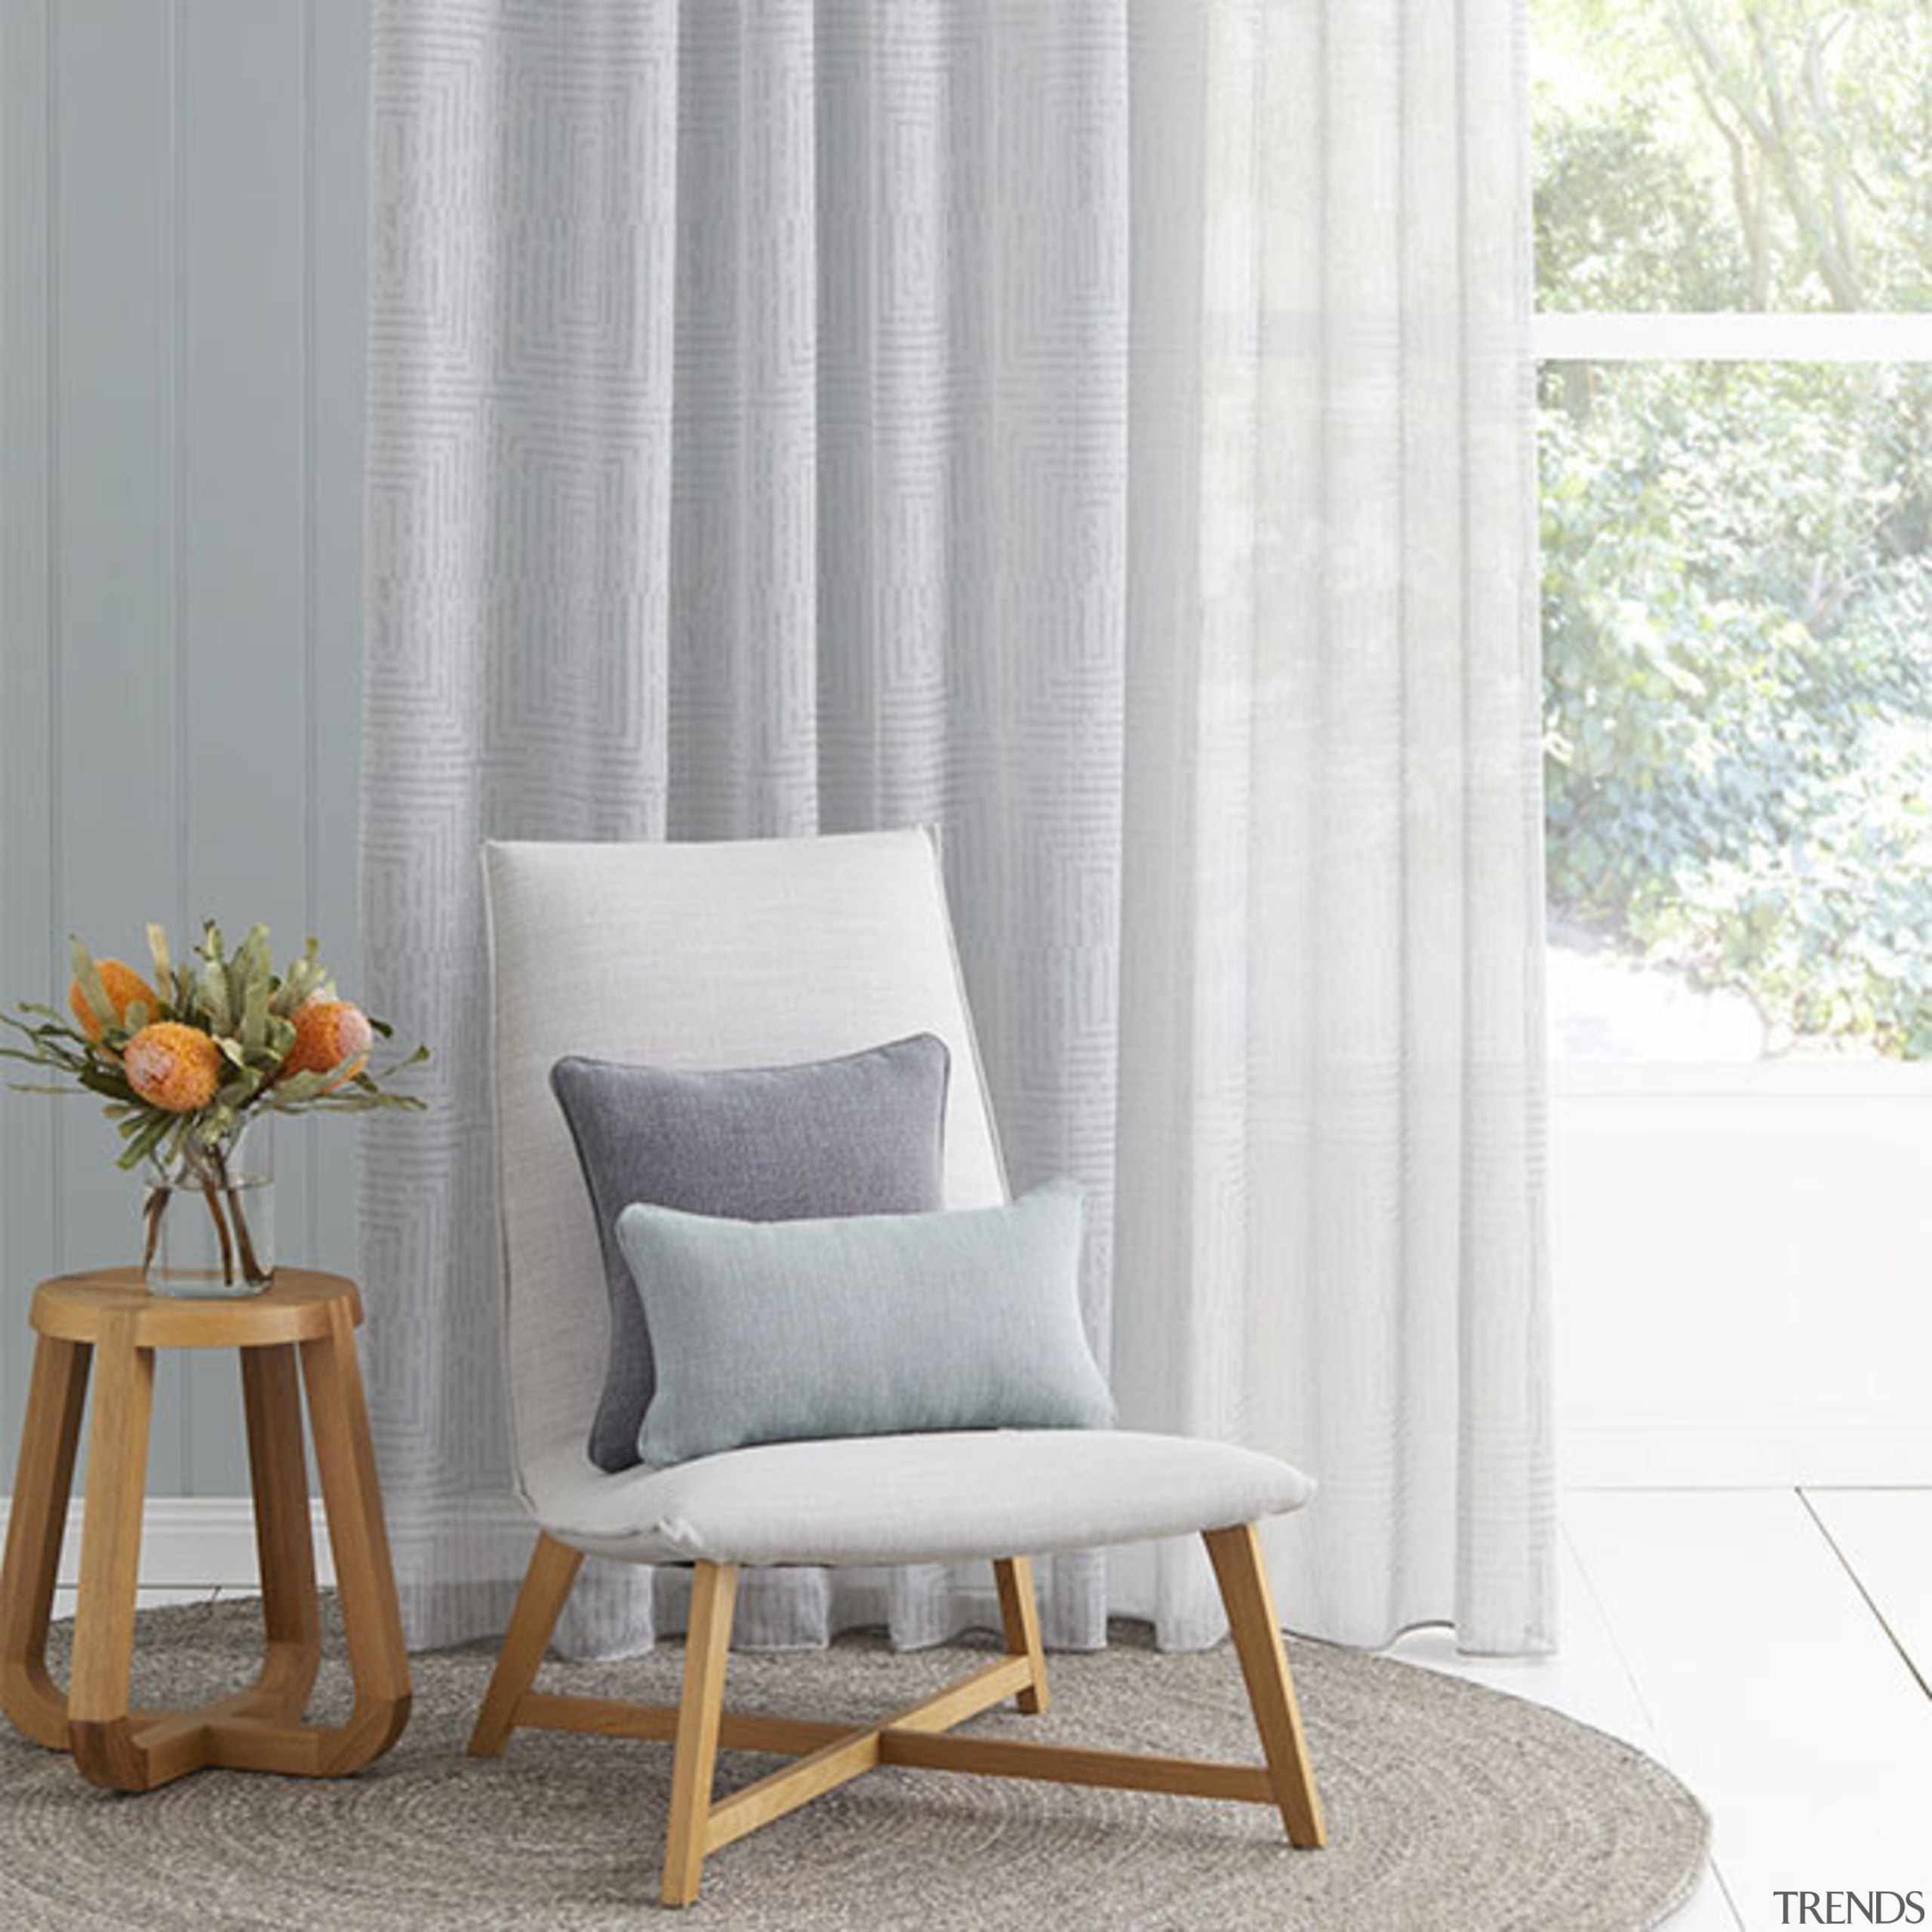 Presenting a sophisticated sheer with a soft lightweight chair, couch, curtain, cushion, floor, furniture, home, interior design, living room, table, textile, window, window covering, window treatment, gray, white